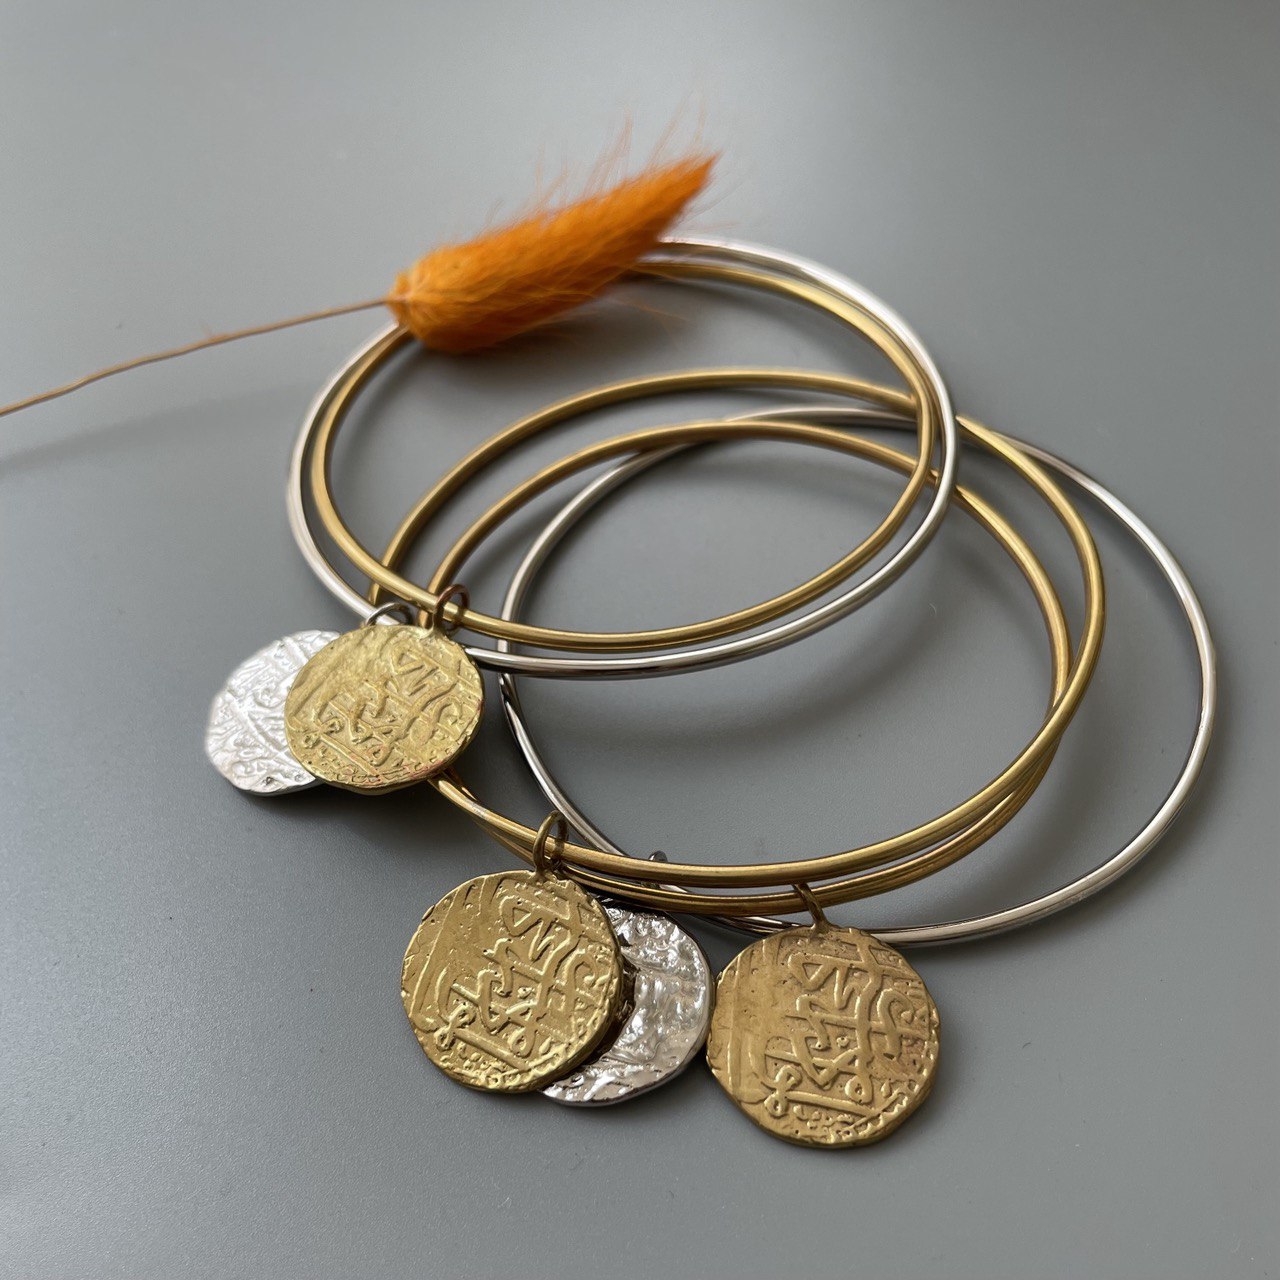 Minimal Bracelet with Persian Coin Charm